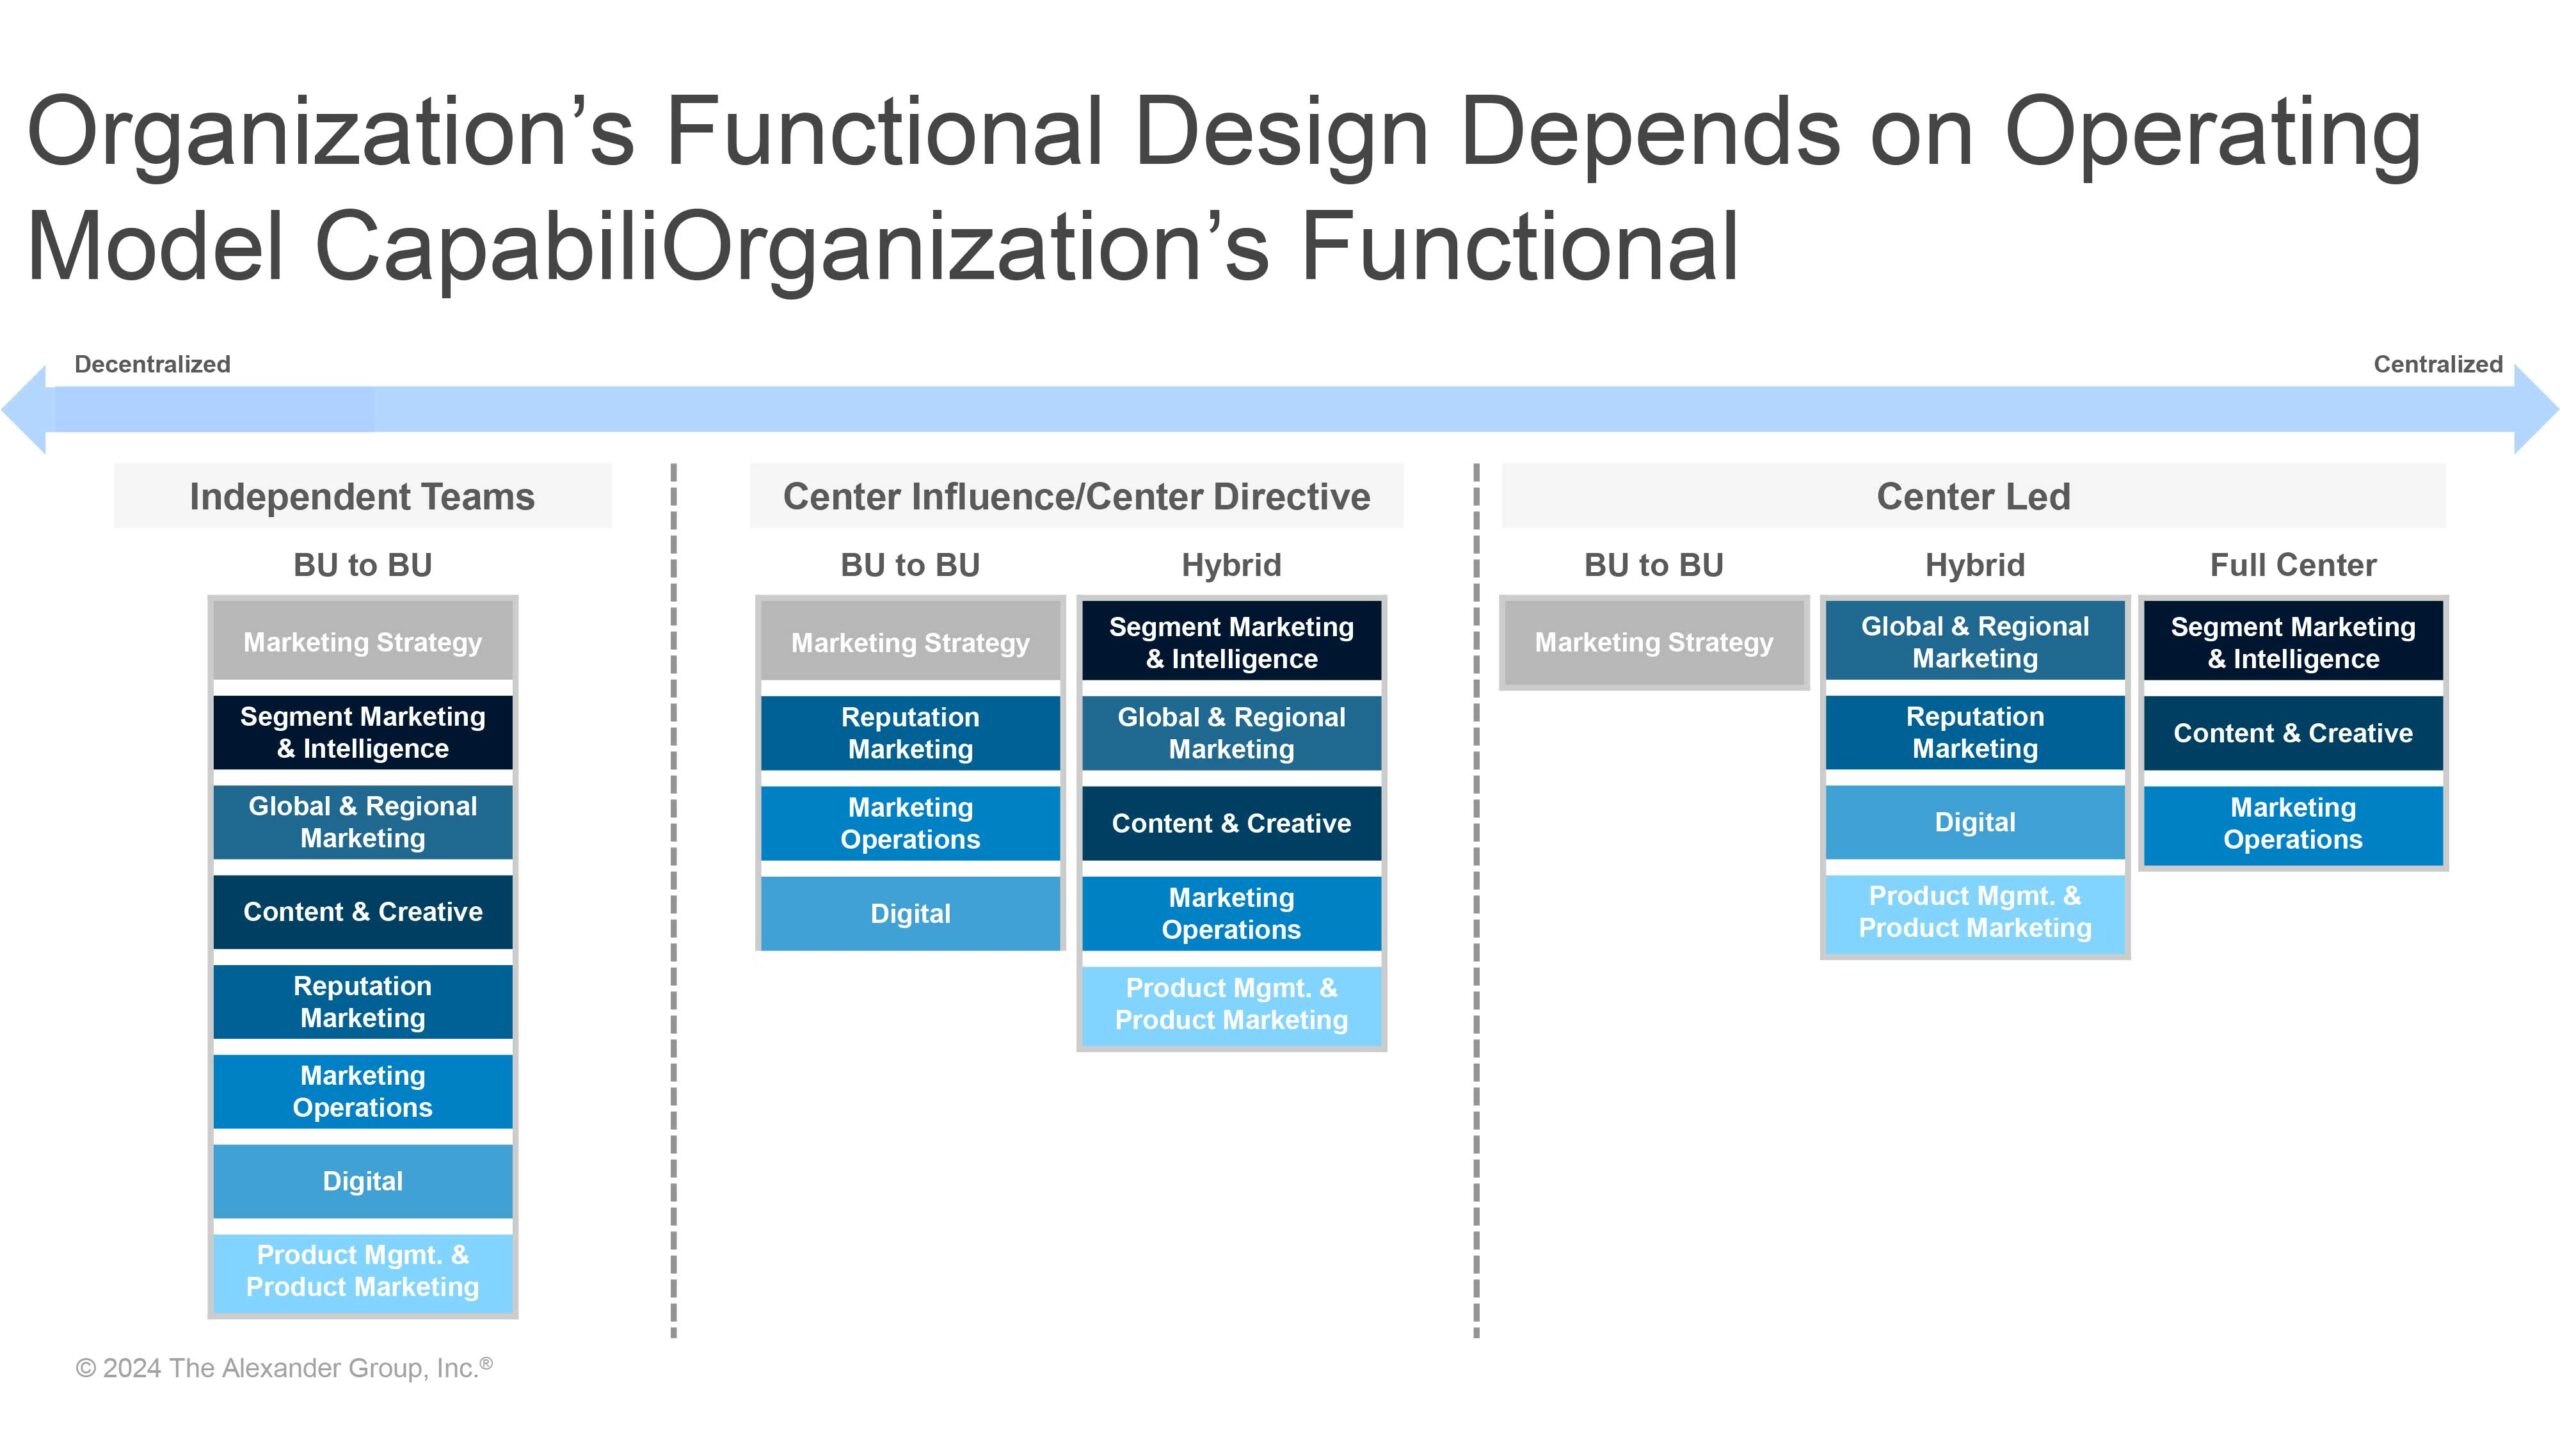 Organization’s Functional Design Depends on Operating Model Capabilities and Maturity - Alexander Group, Inc.